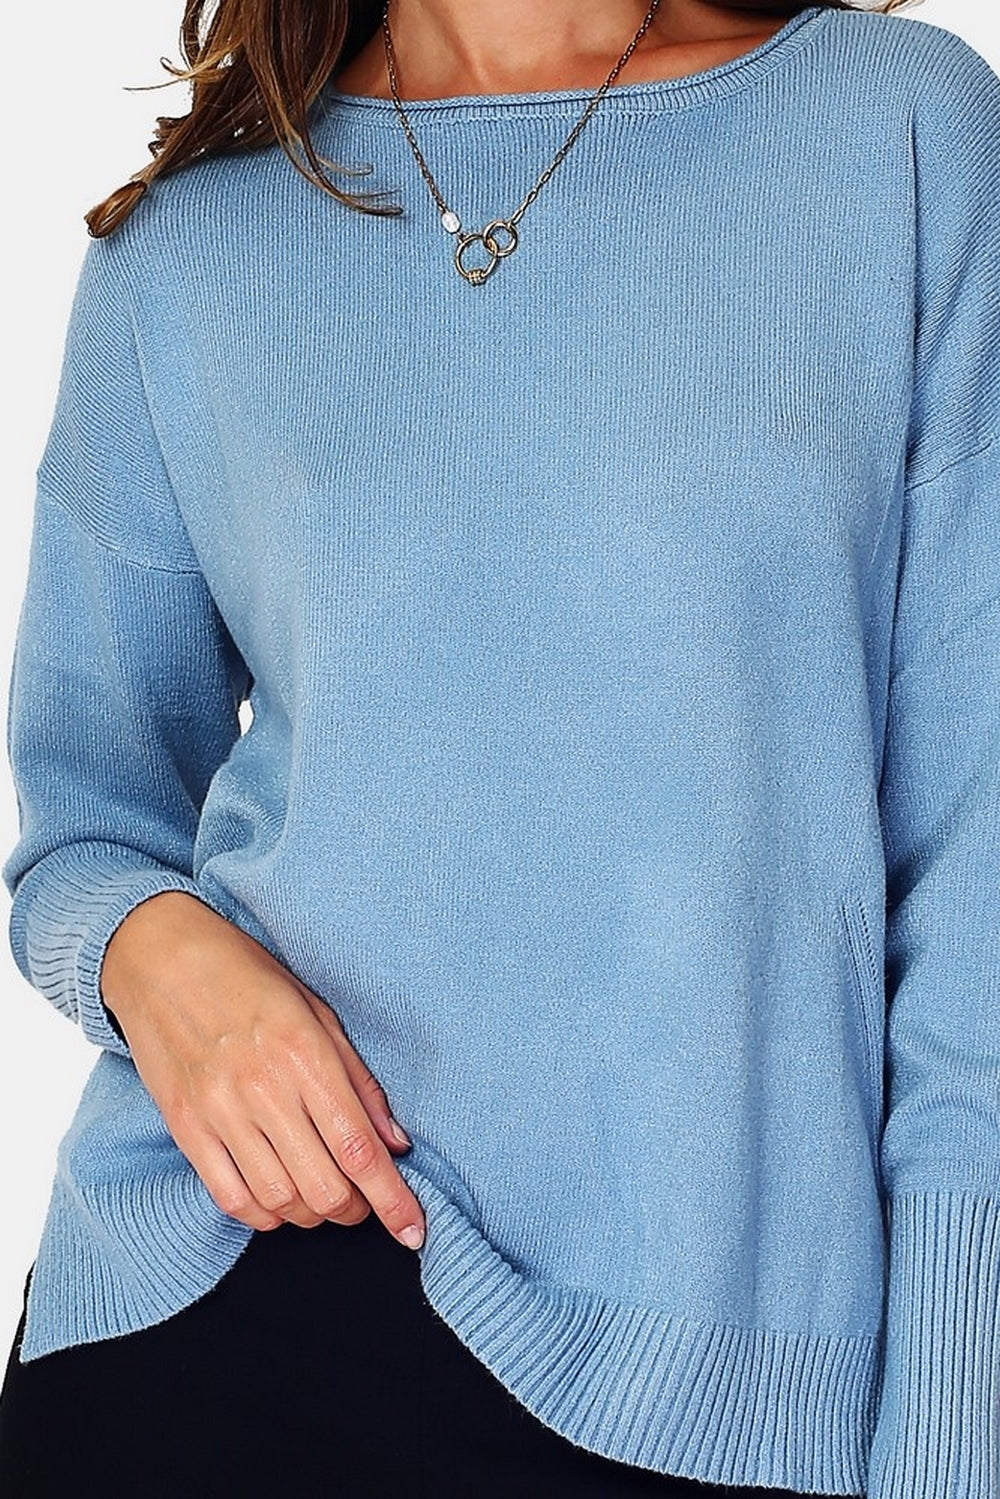 Wide jumper with trailer collar, openwork on both sides in front